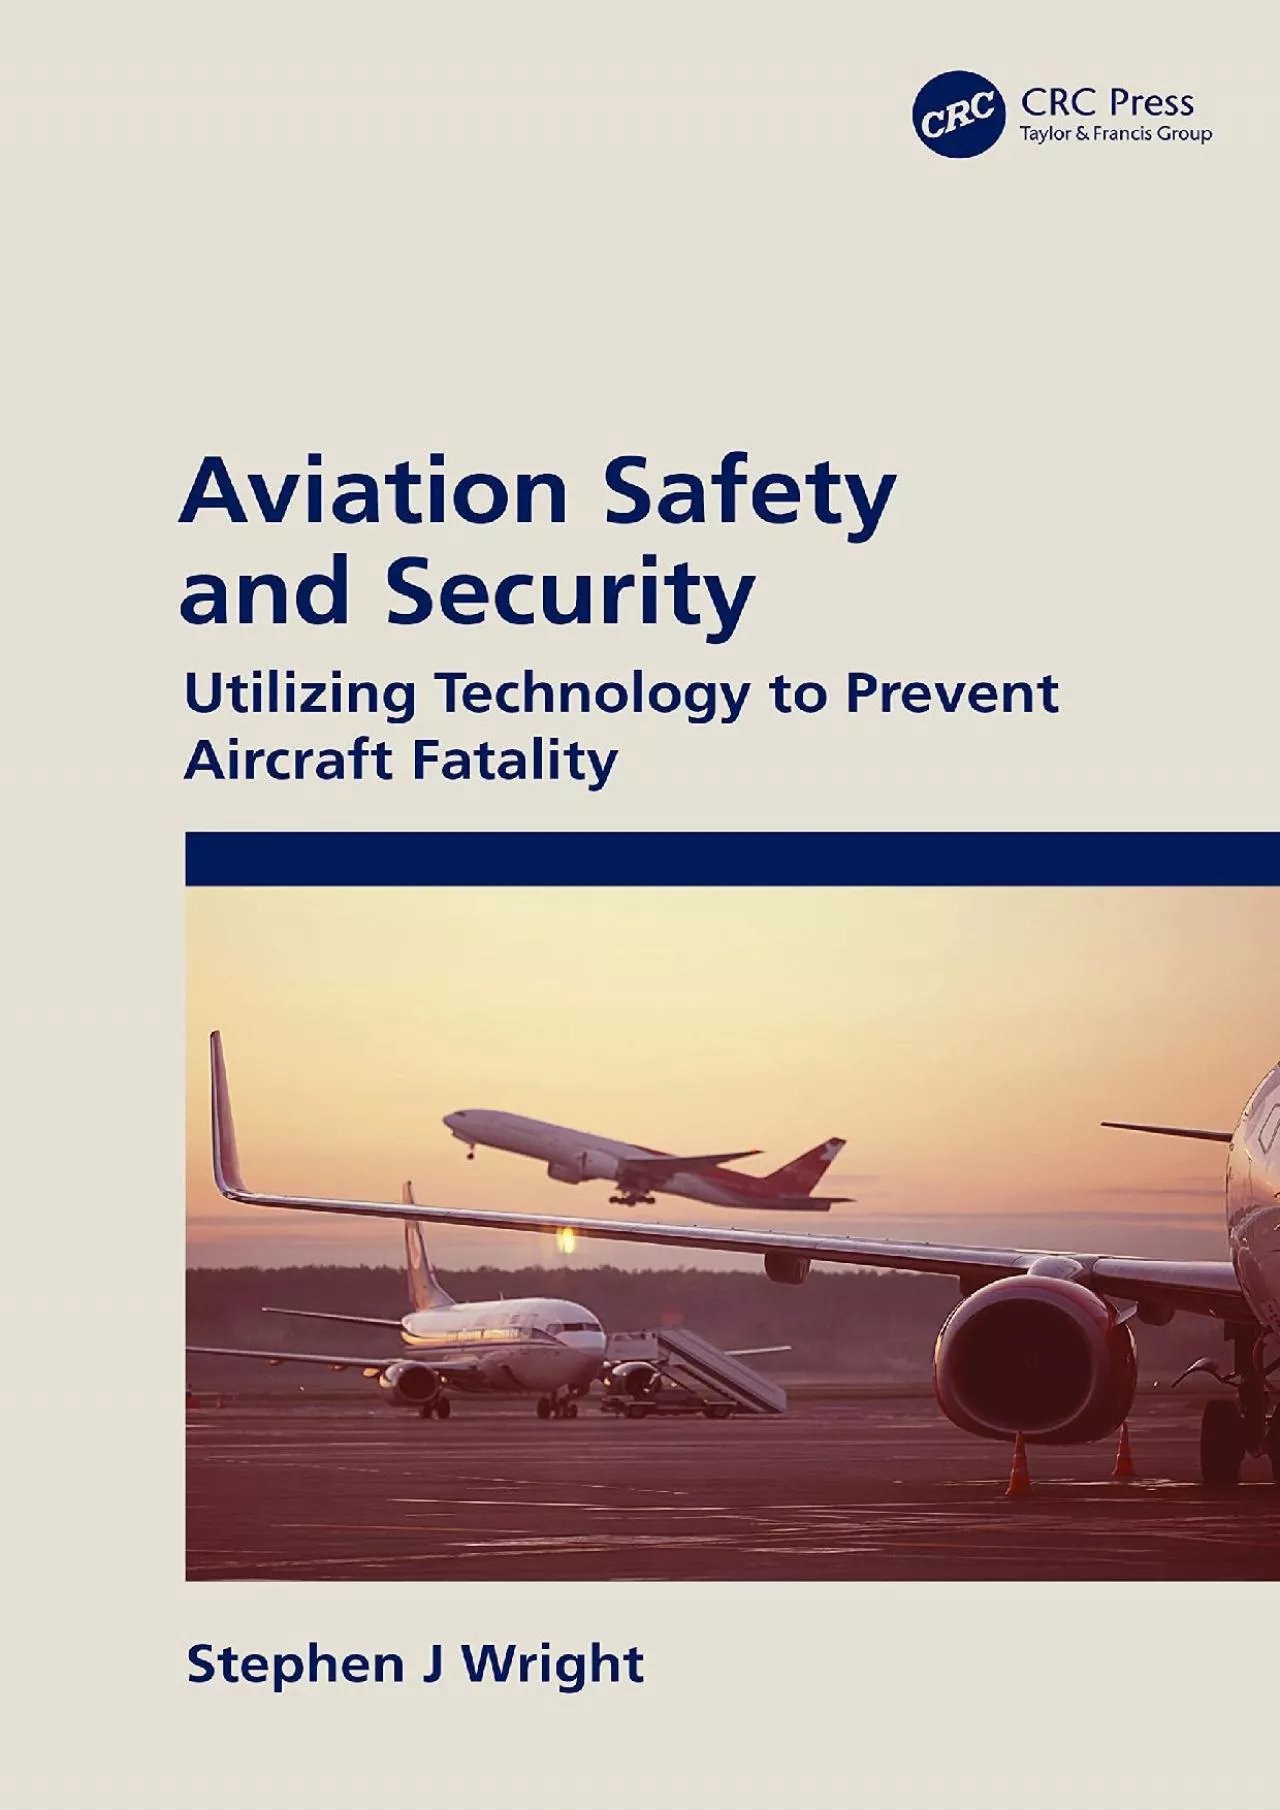 (BOOS)-Aviation Safety and Security: Utilizing Technology to Prevent Aircraft Fatality